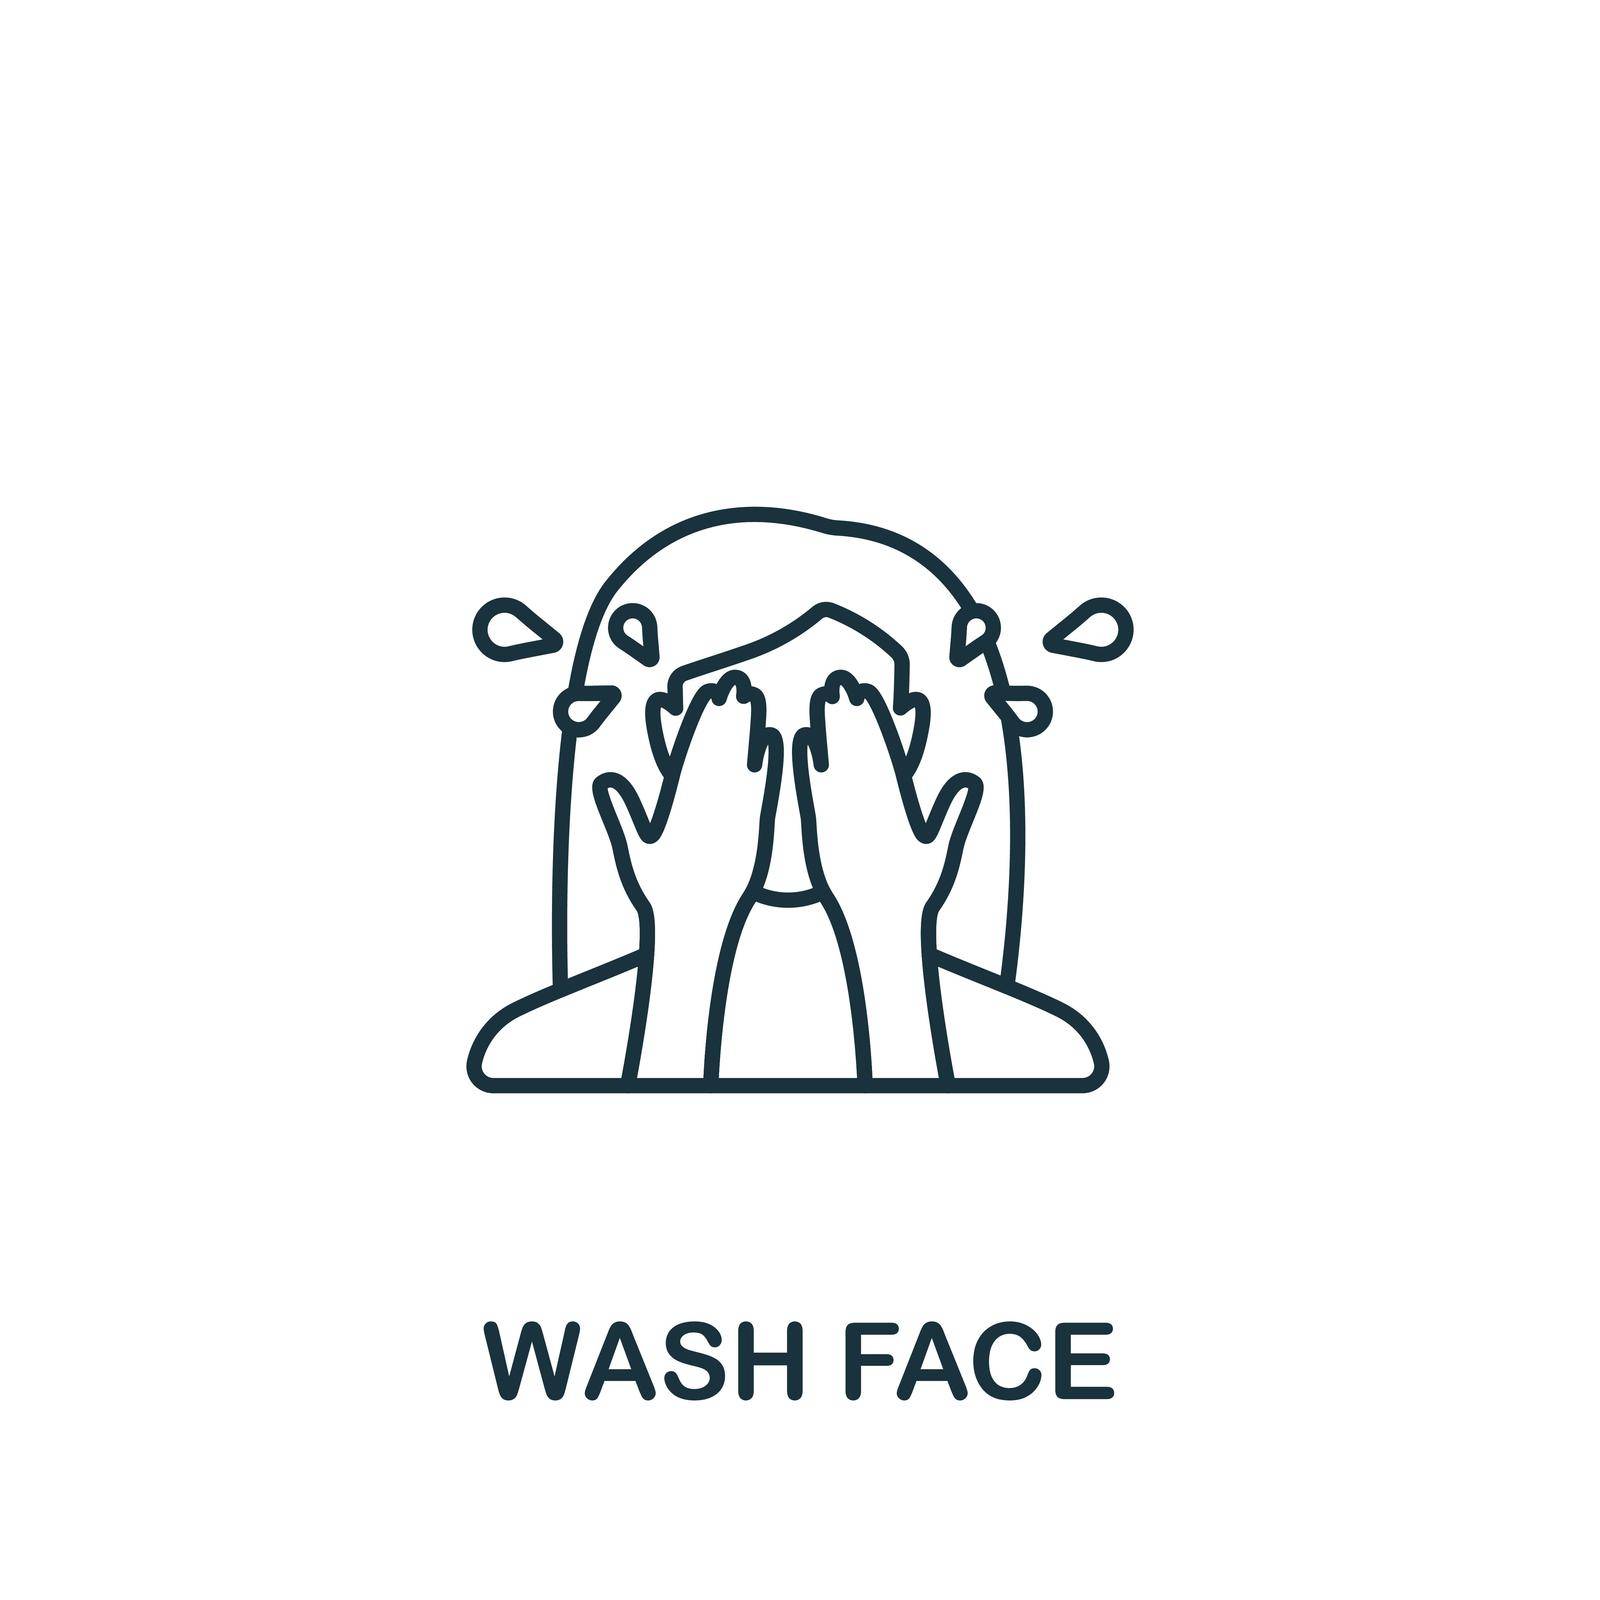 Wash Face icon. Line simple icon for templates, web design and infographics by simakovavector